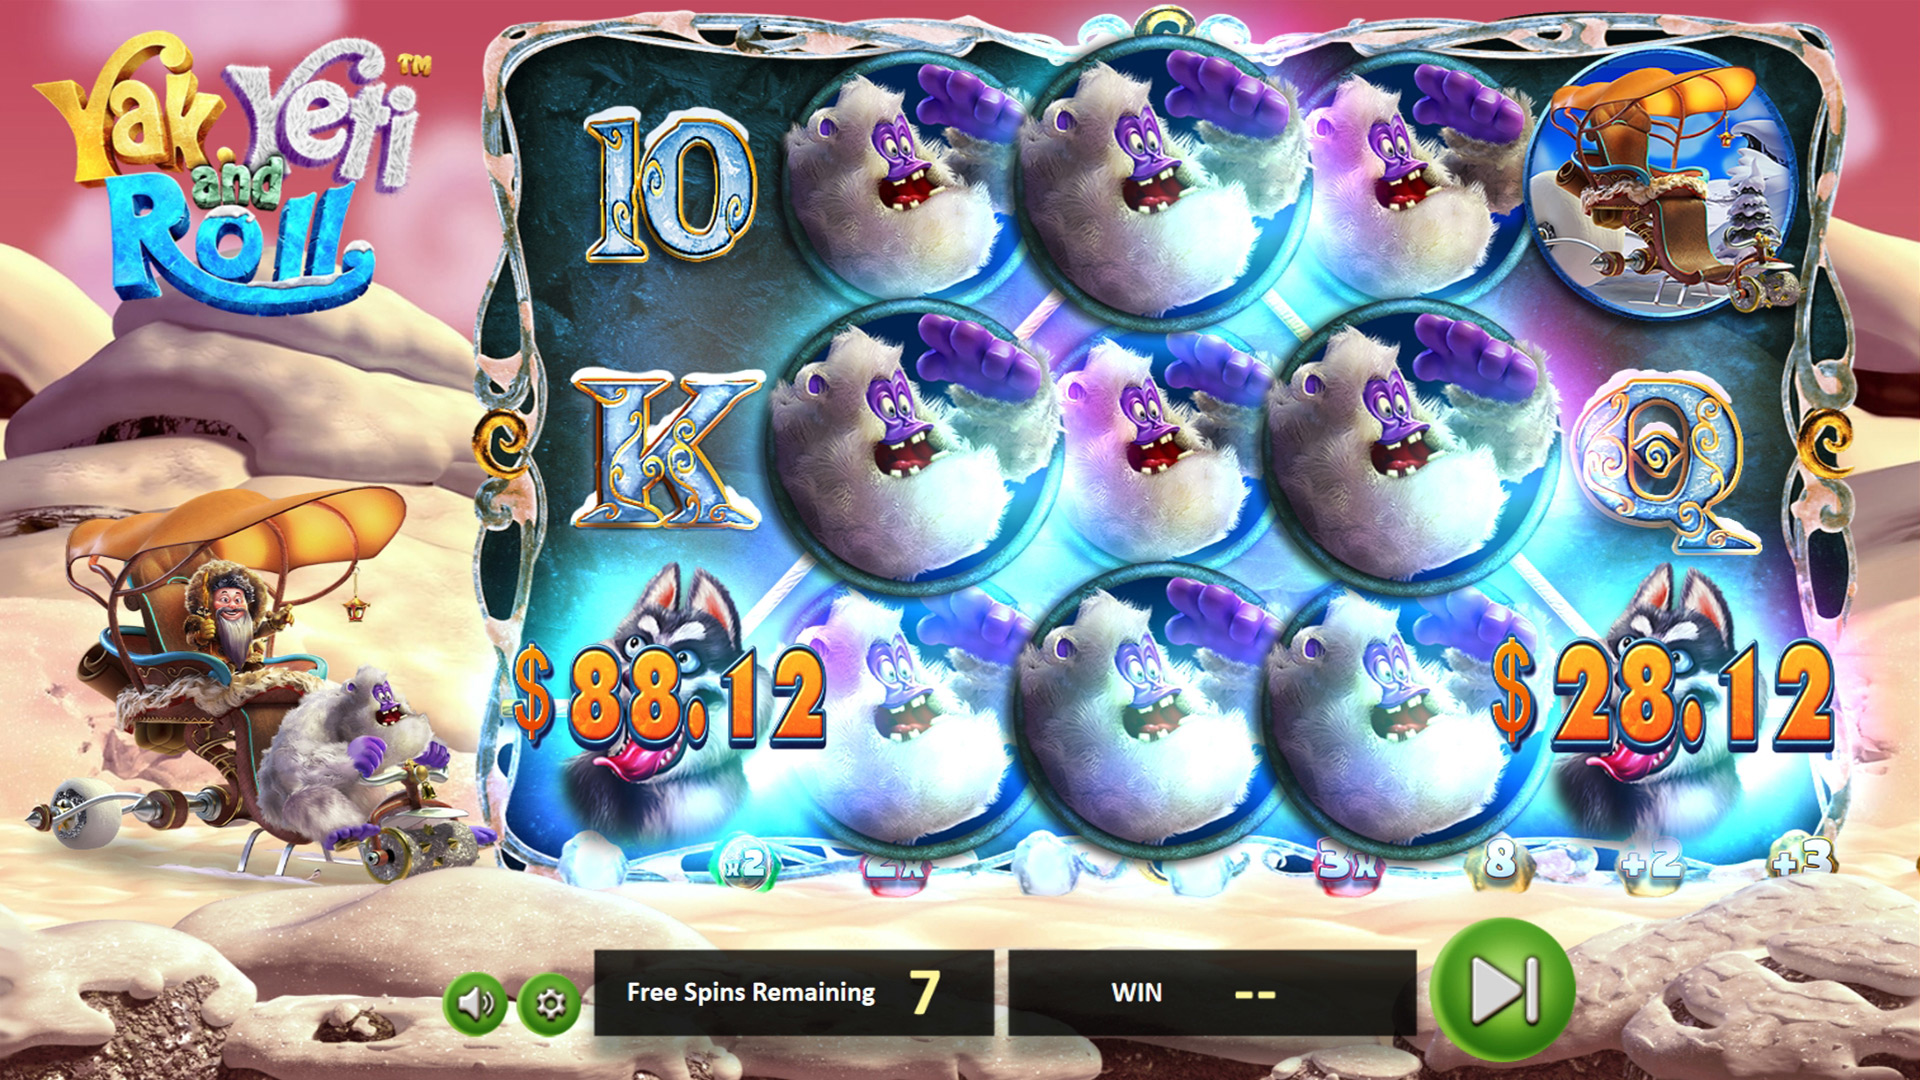 Yak Yeti And Roll - Frosty Free Spins